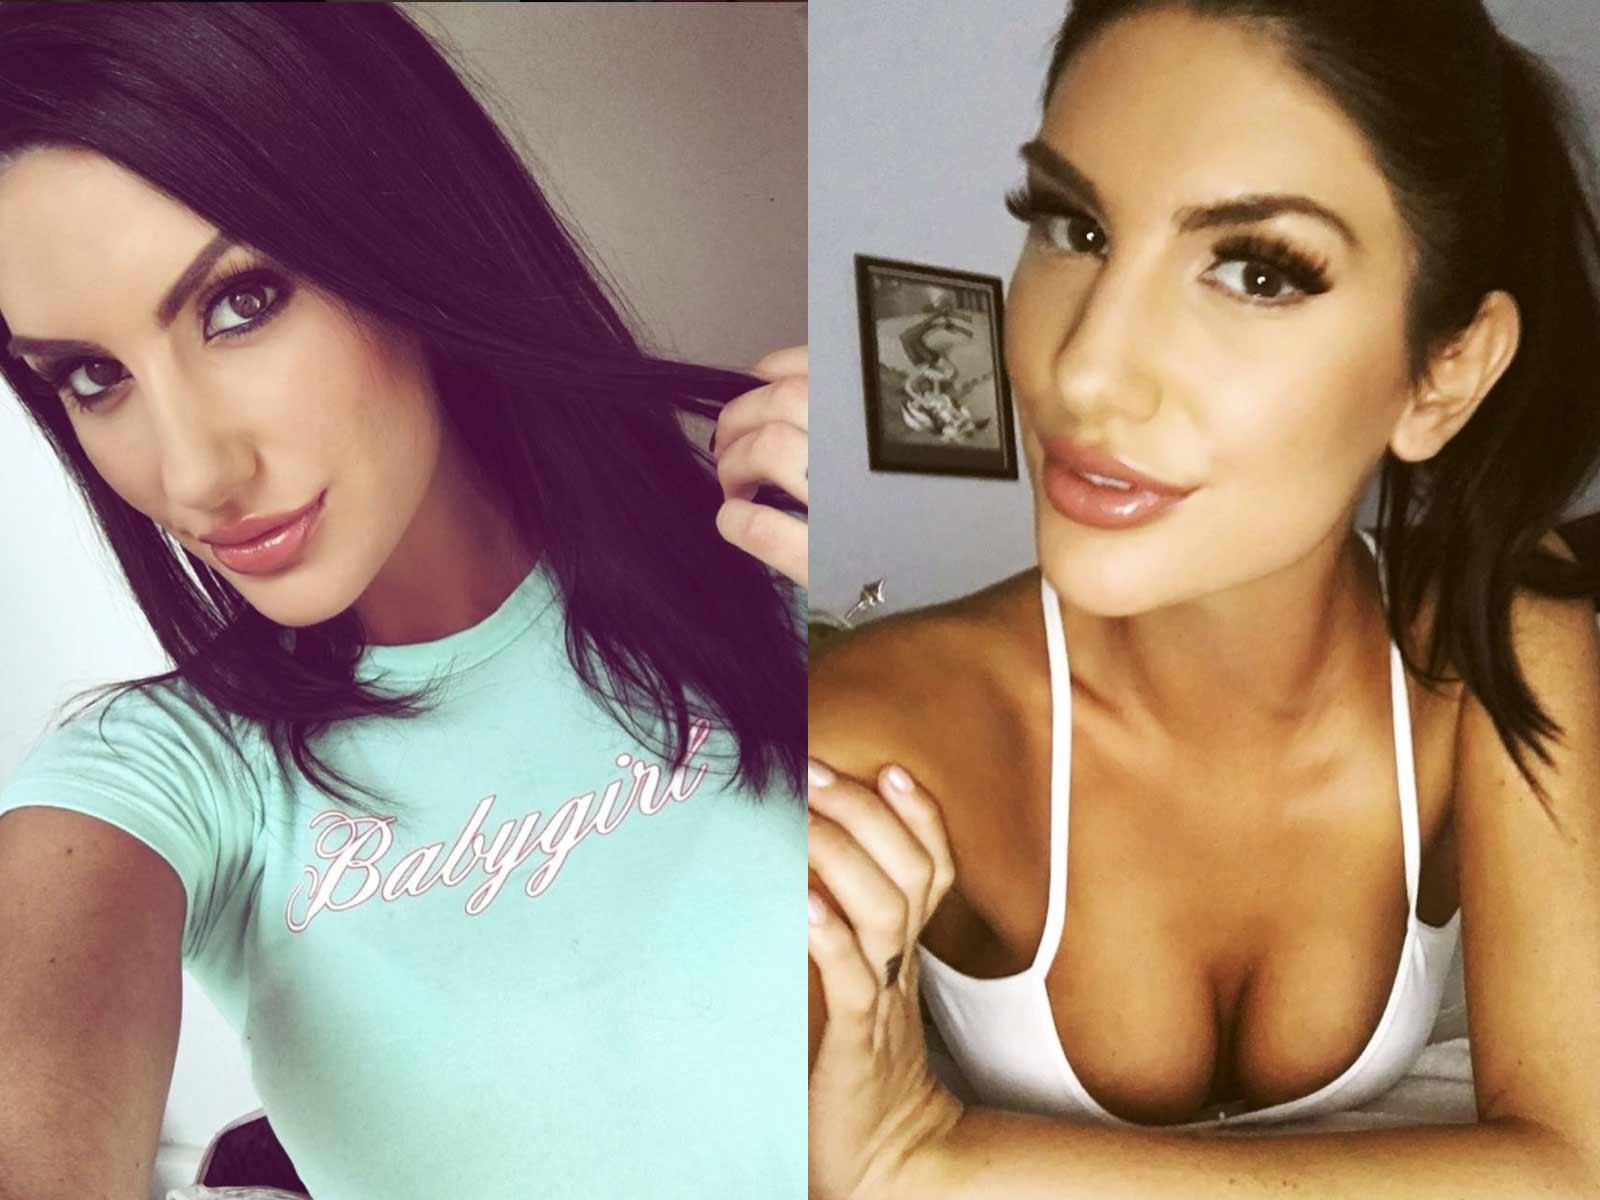 Pornstar August Ames Dies at 23, Suicide By Hanging (UPDATE)